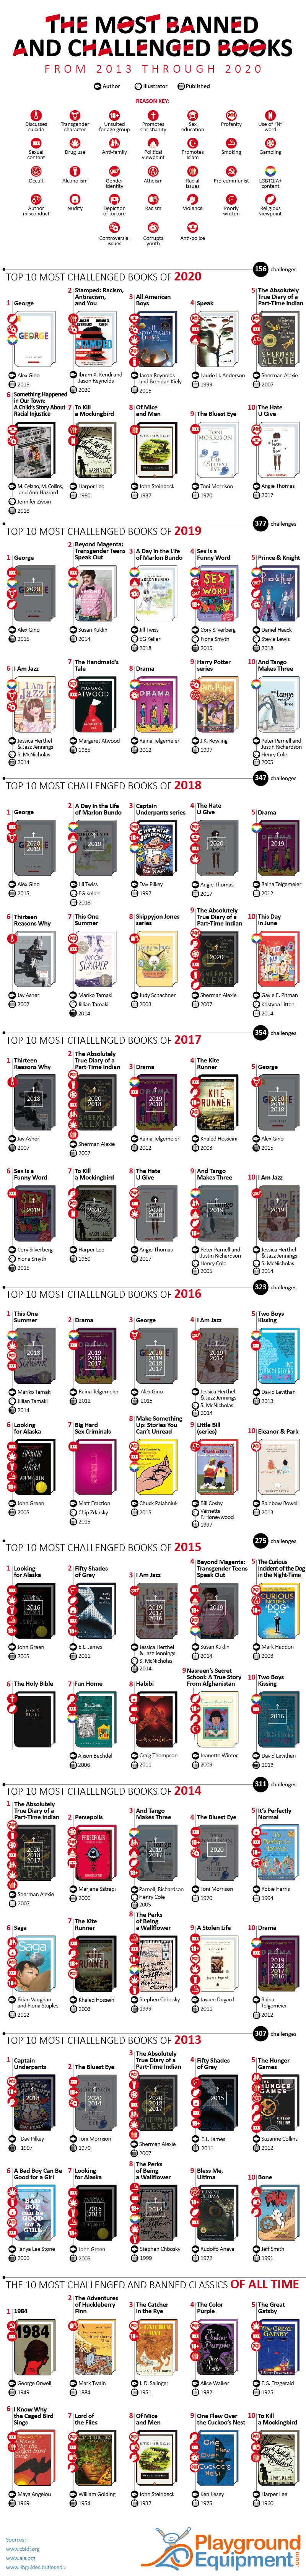 The Most Banned and Challenged Books of the Past 8 Years [UPDATED] - Playground Equipment - Infographic